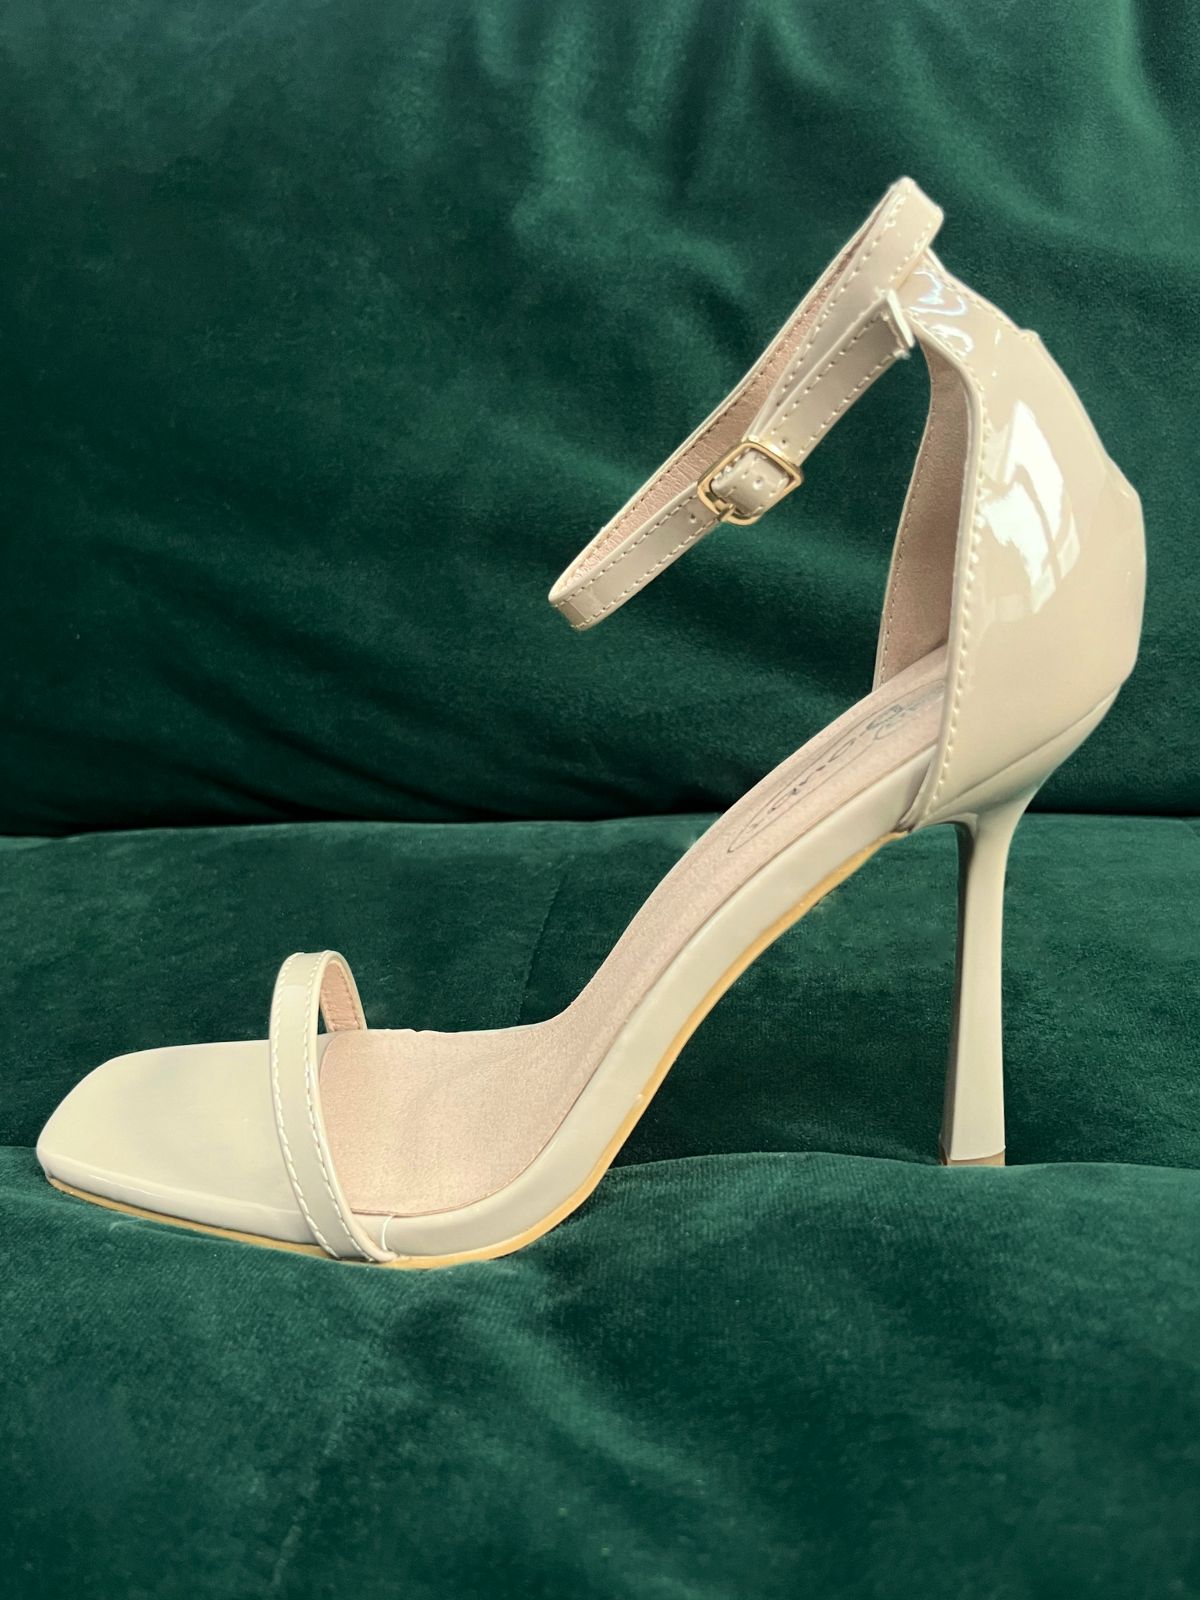 Patent Leather Strappy Heels in Nude | Lilla Barely There Heel